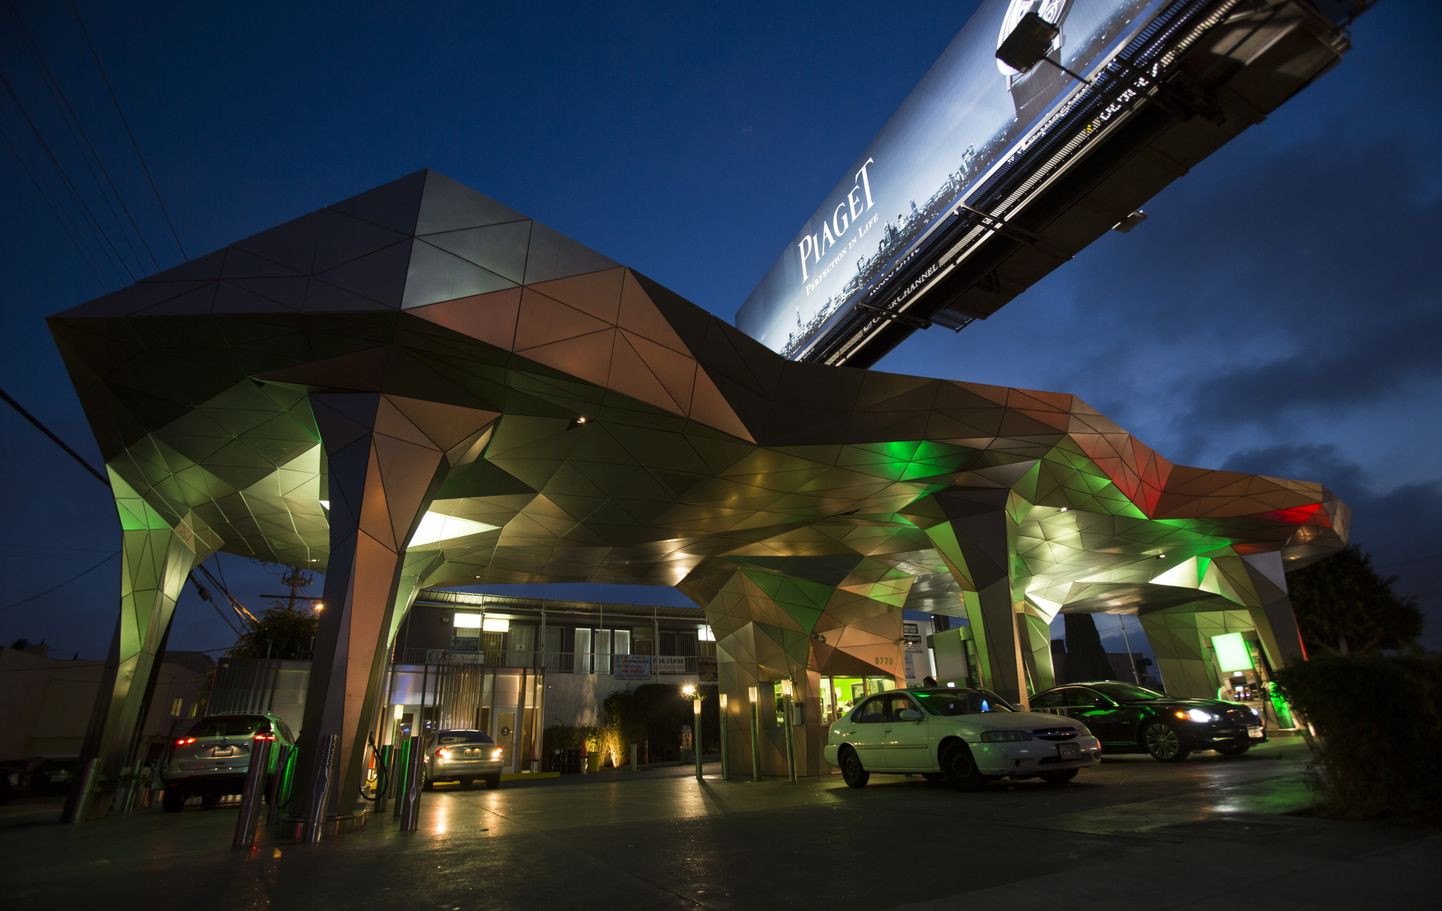 The Helios House gas station is pictured in Los Angeles